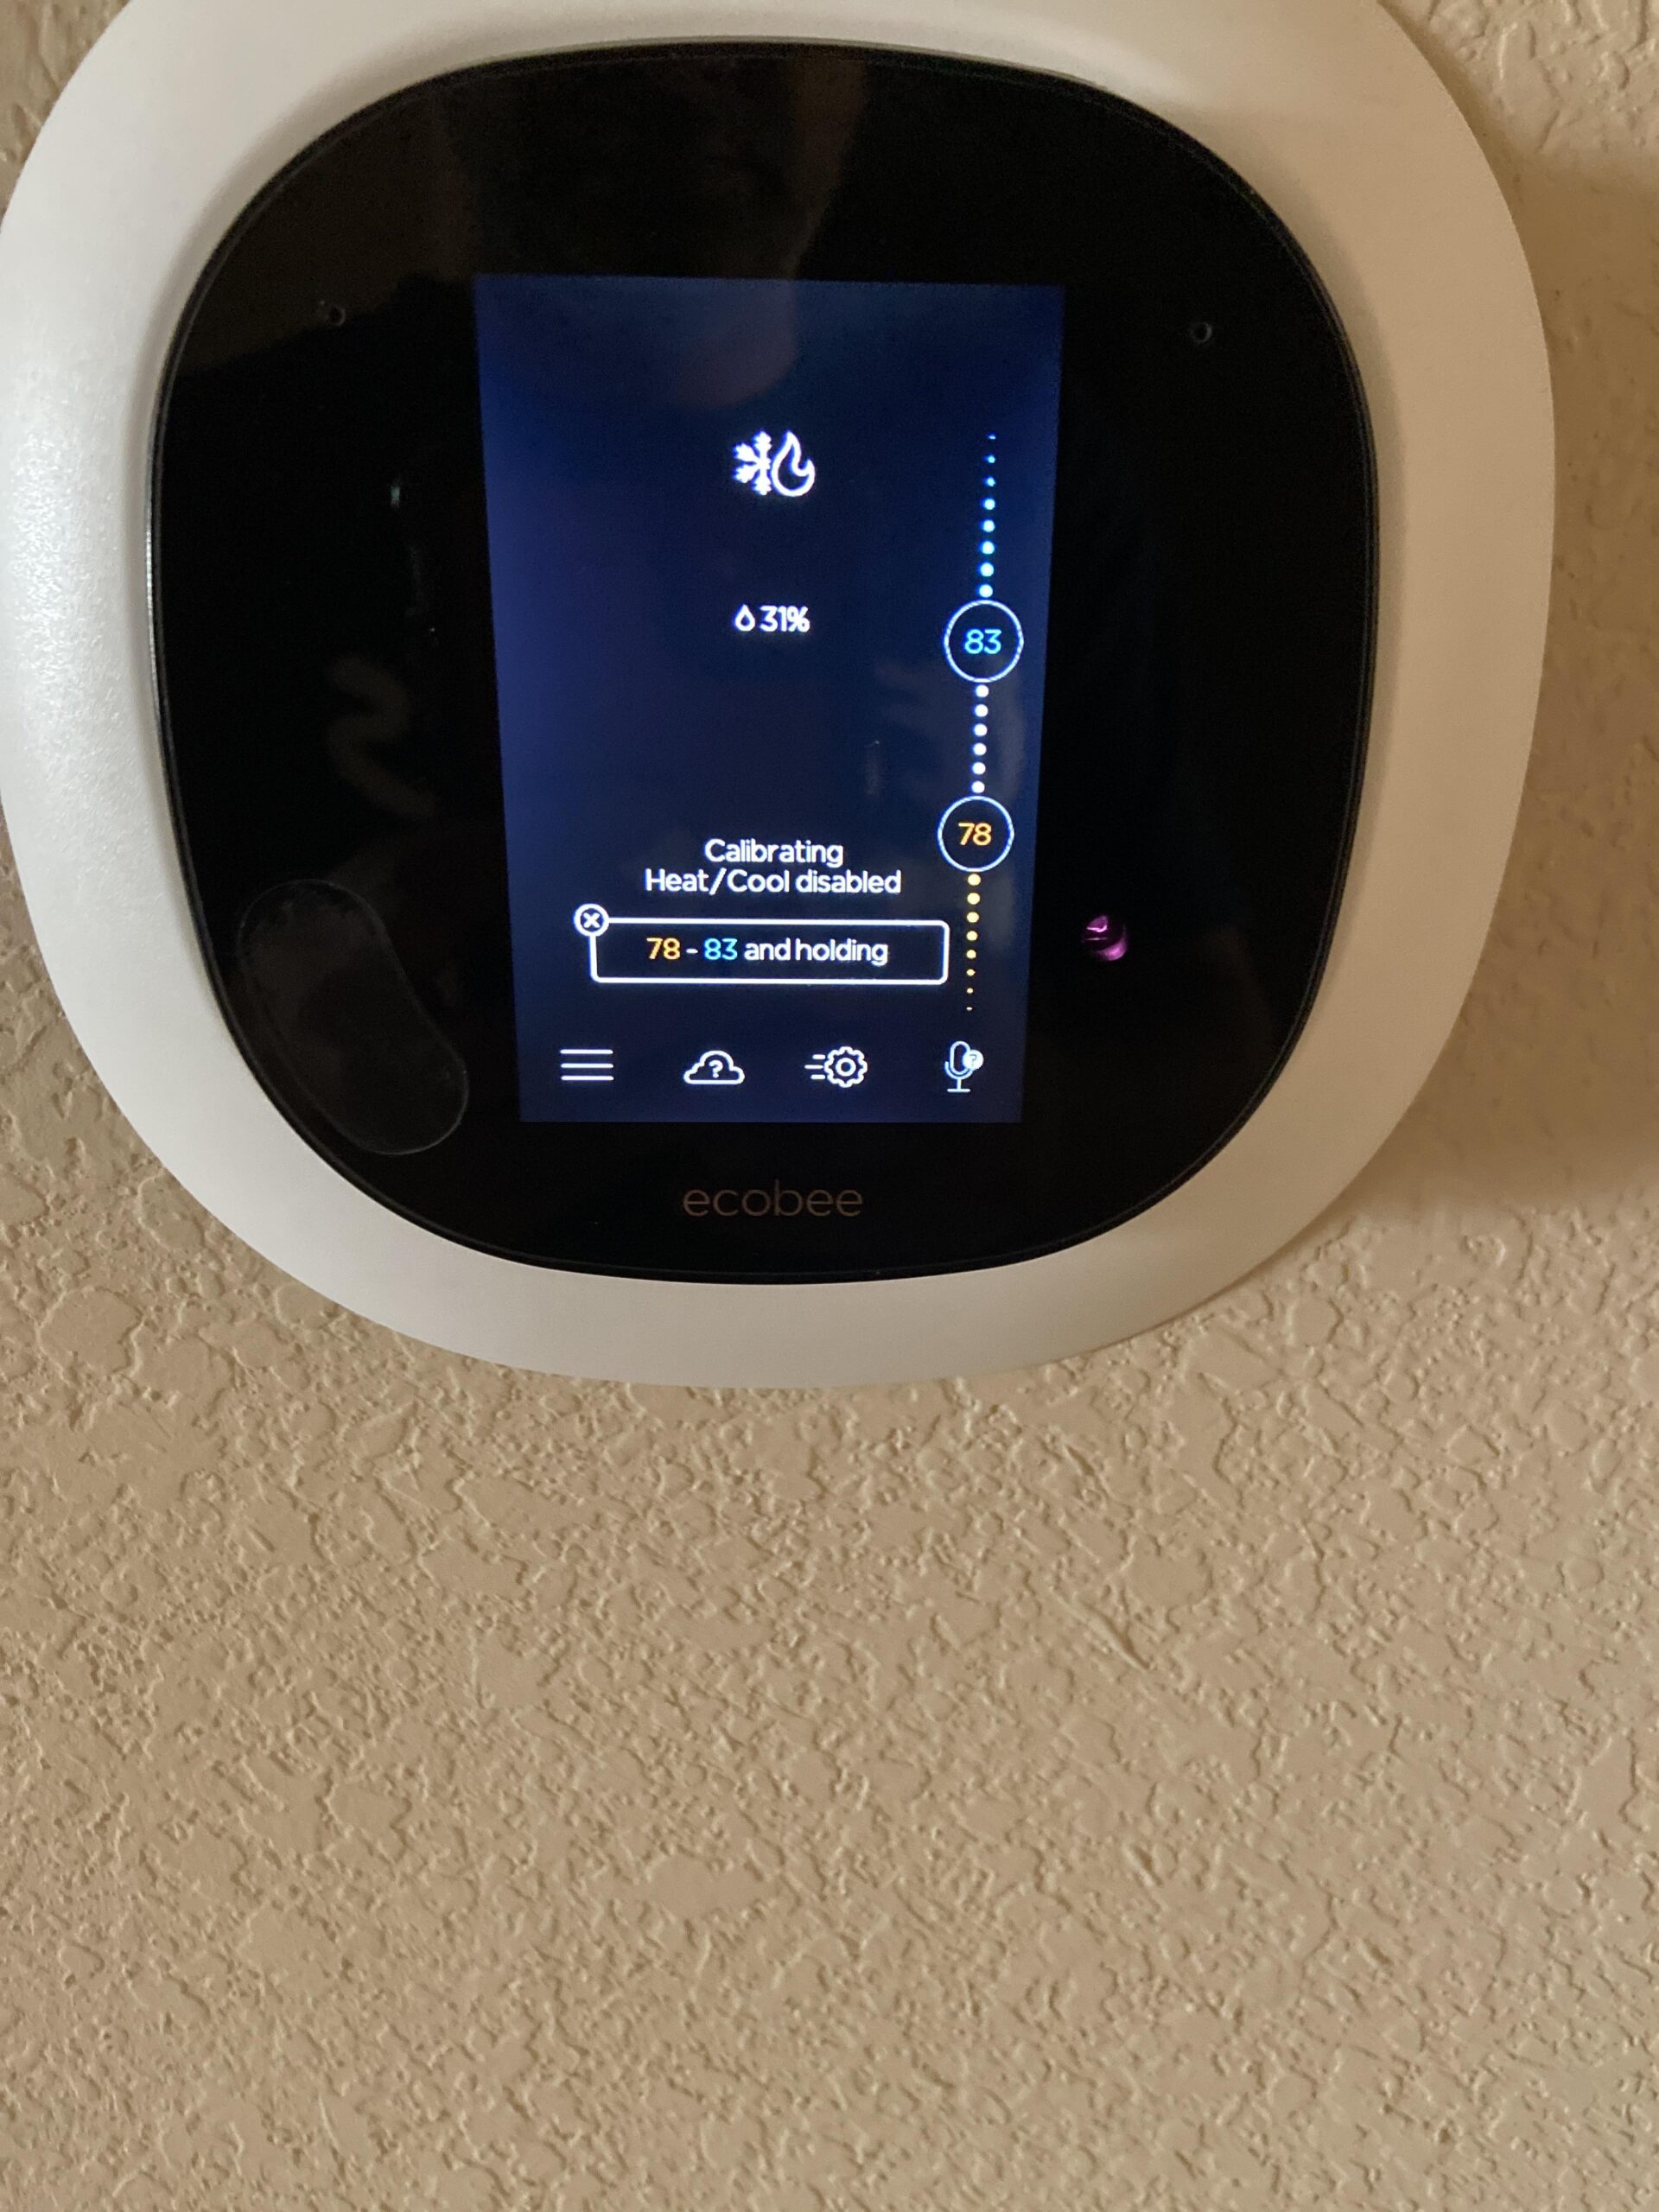 My Ecobee Says “Calibrating” – Check Hvac For Filter Clogs